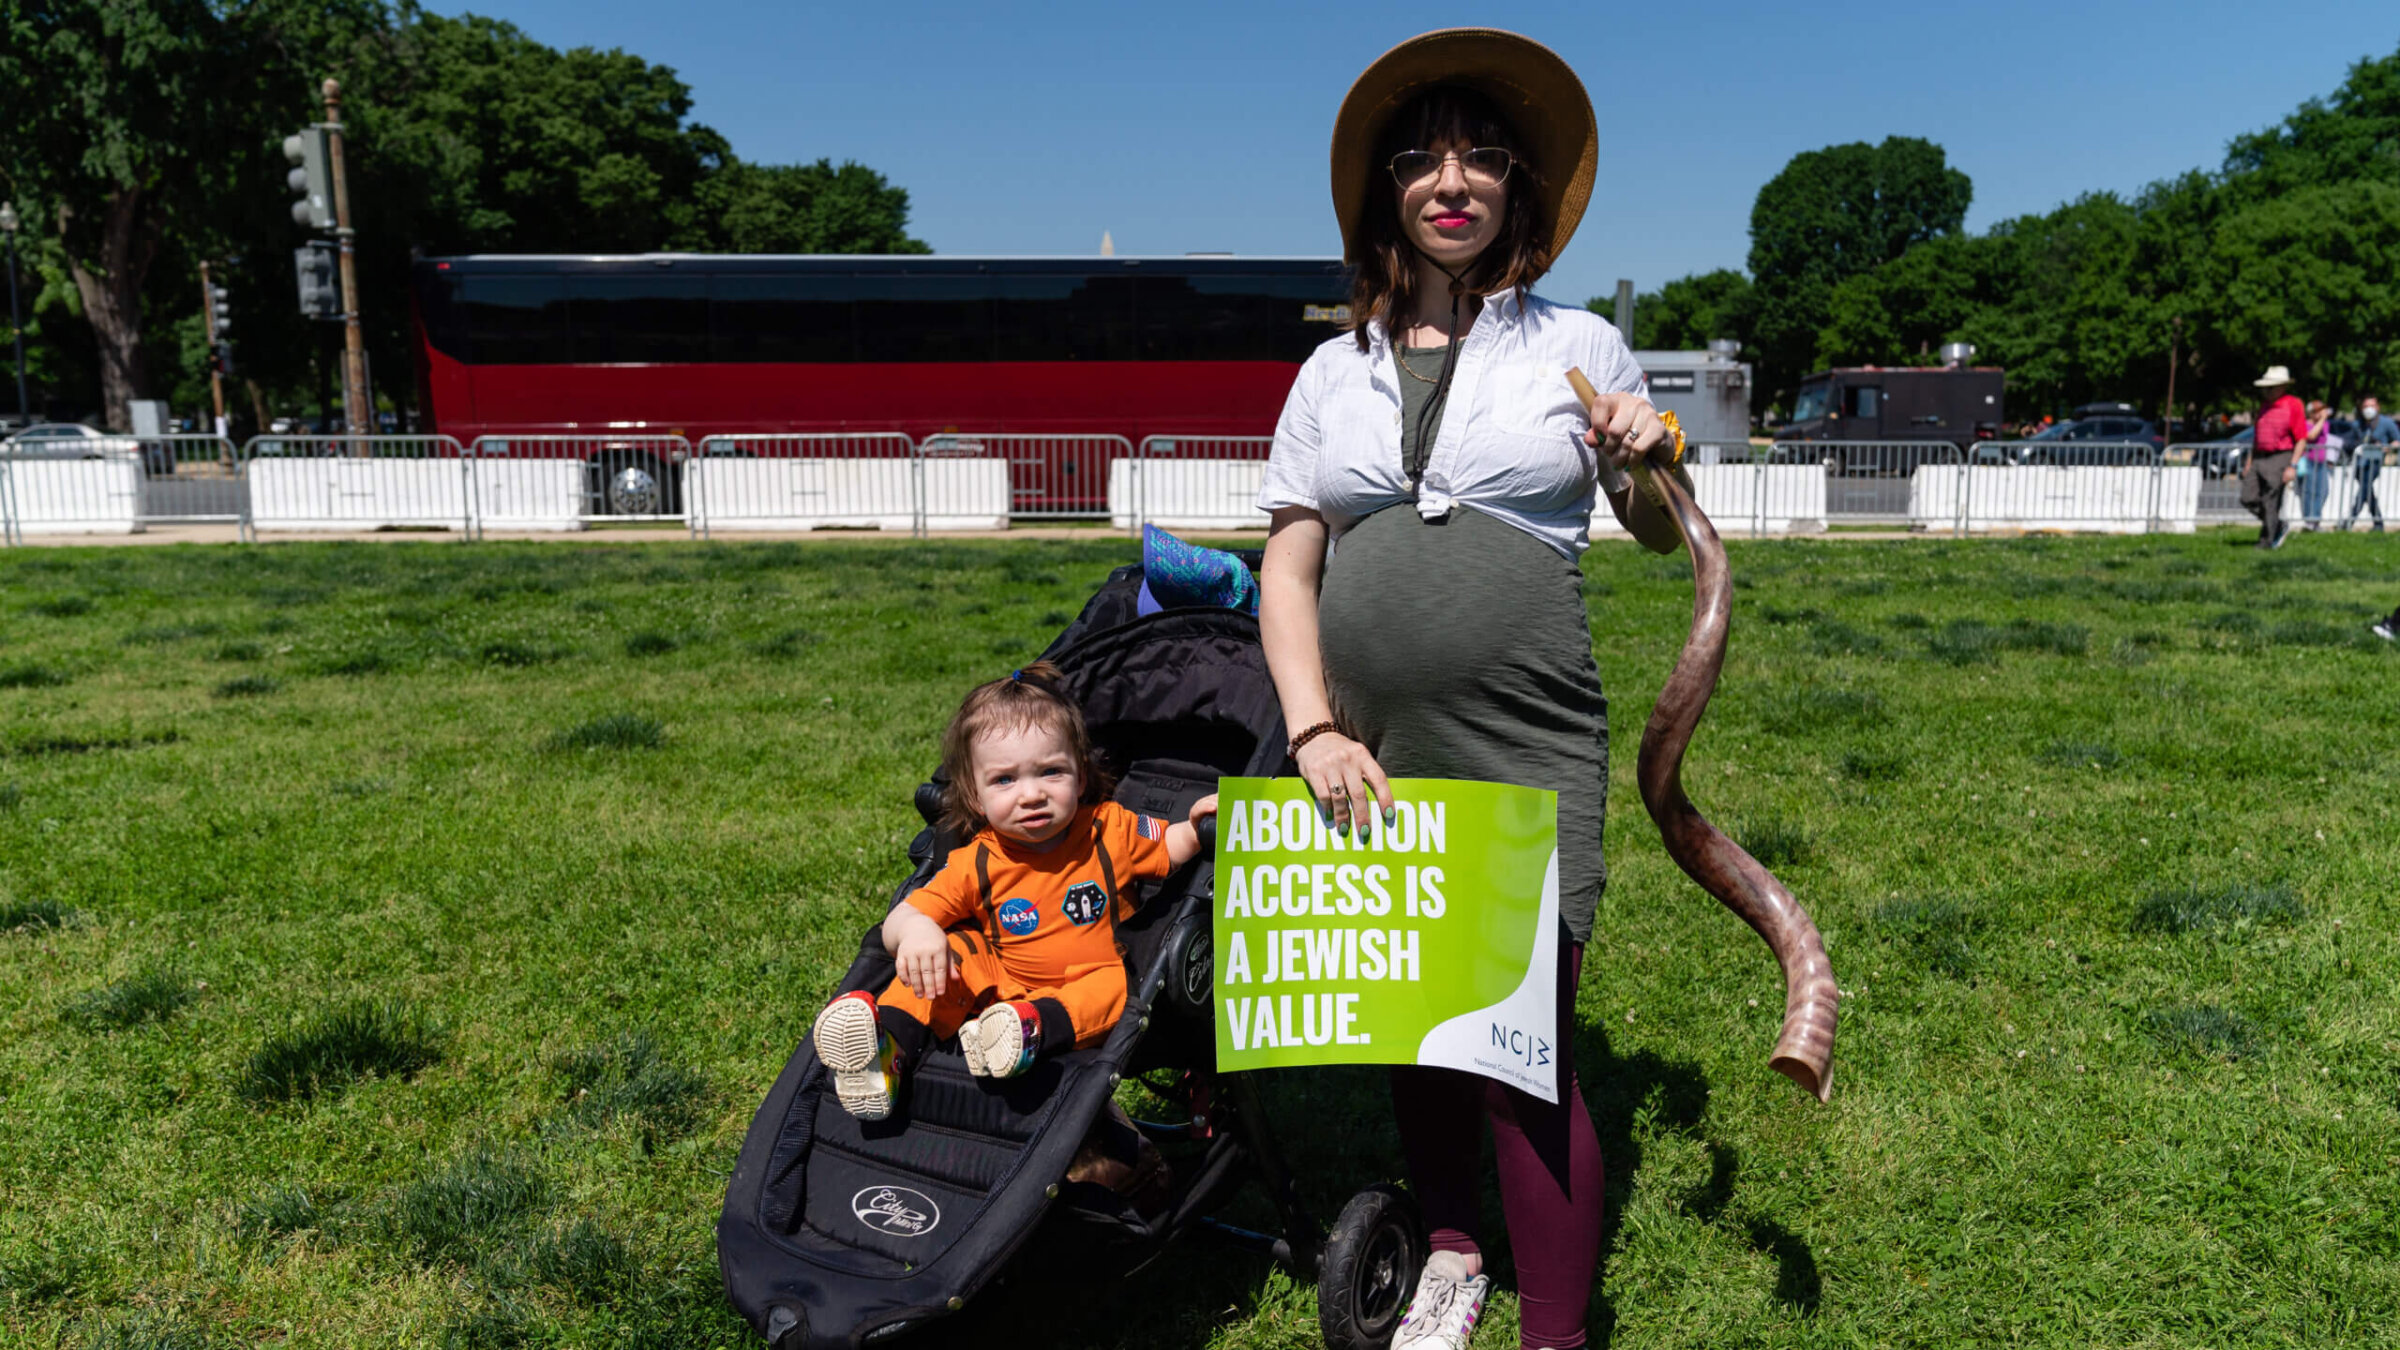 Amanda Herring, 32, and her child Abraham, 1, of Washington, D.C., pose for a portrait during the Jewish Rally for Abortion Justice, May 17. 2022.